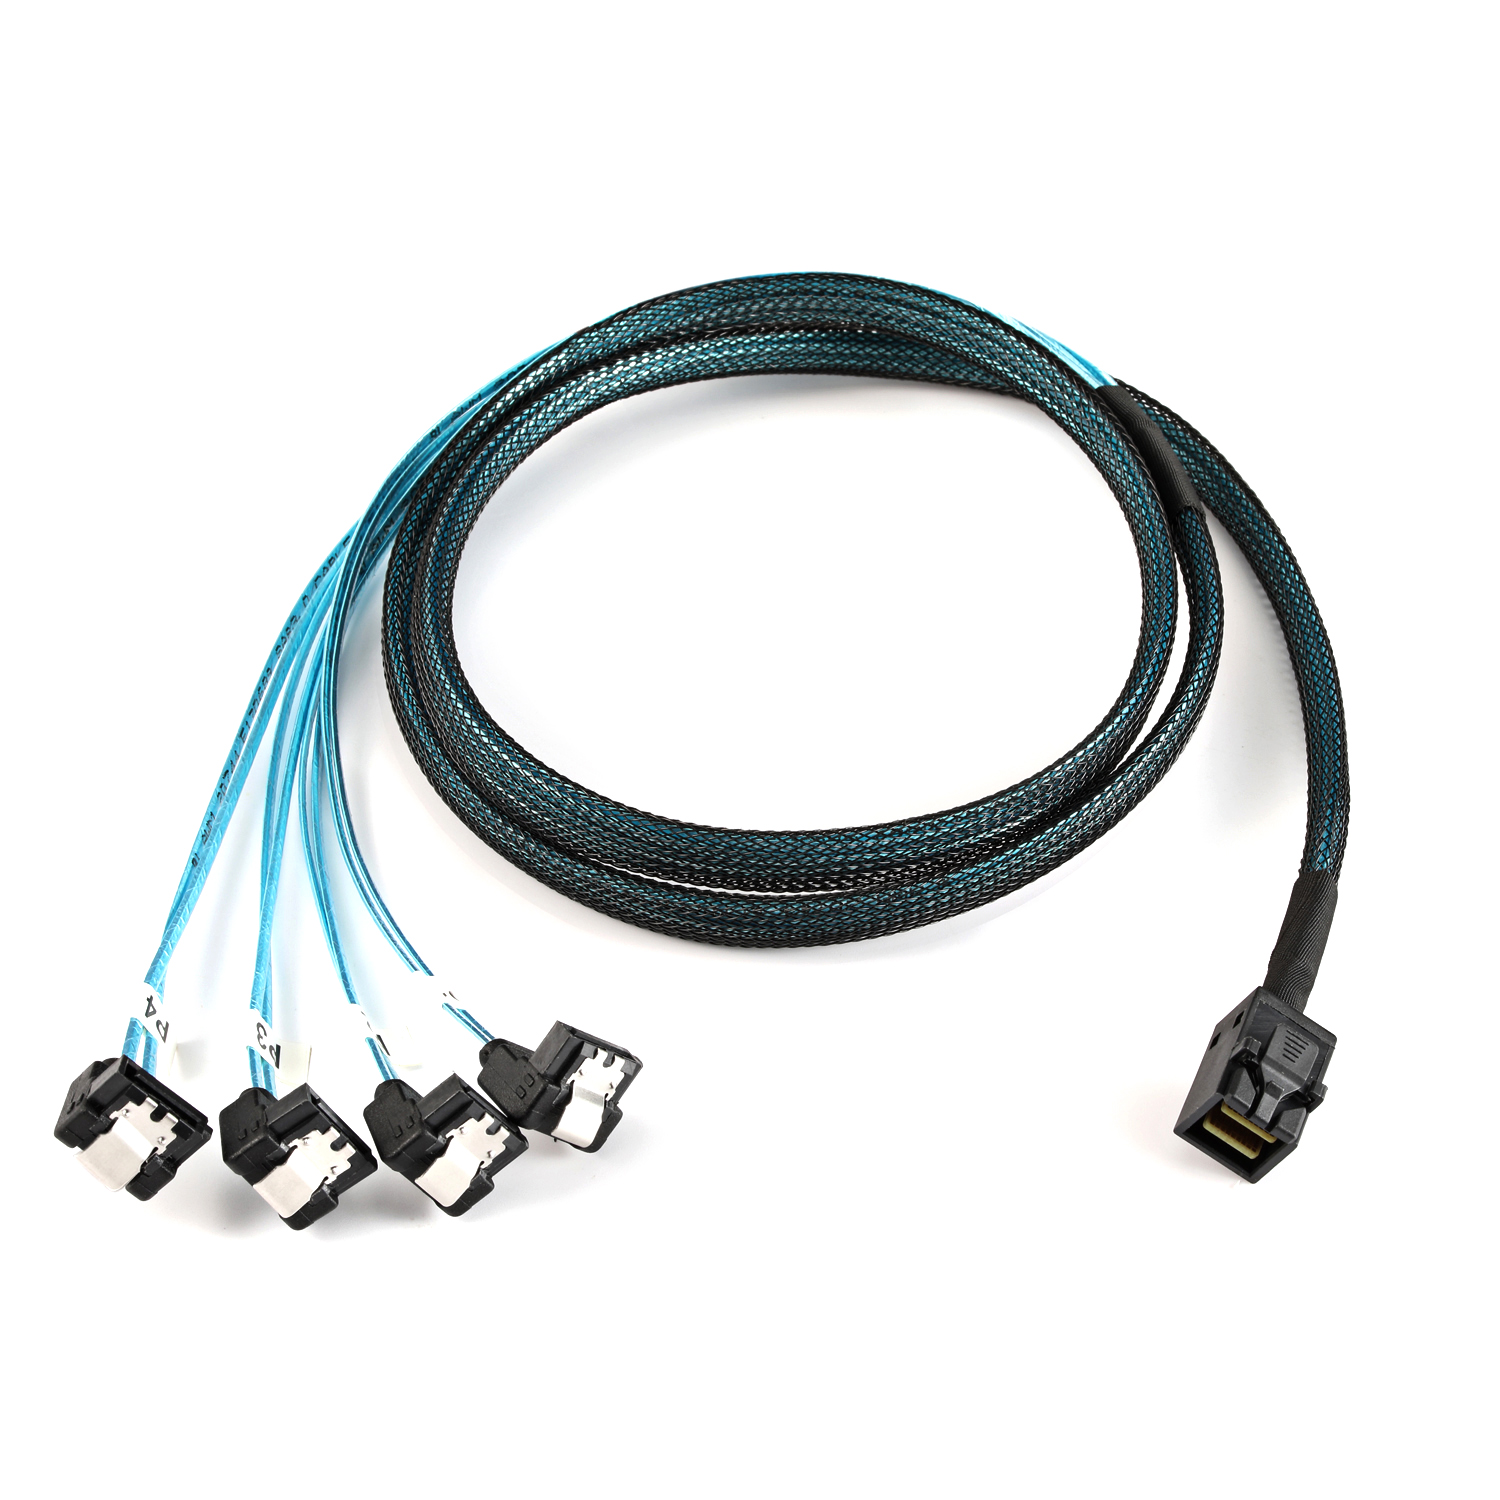 CableDeconn SFF-8643 Internal Mini SAS HD to (4) 29pin SFF-8482 connectors  with SAS 15pin Power Port 12GB/S Cable H0204-SFF8643 HD-CableDeconn